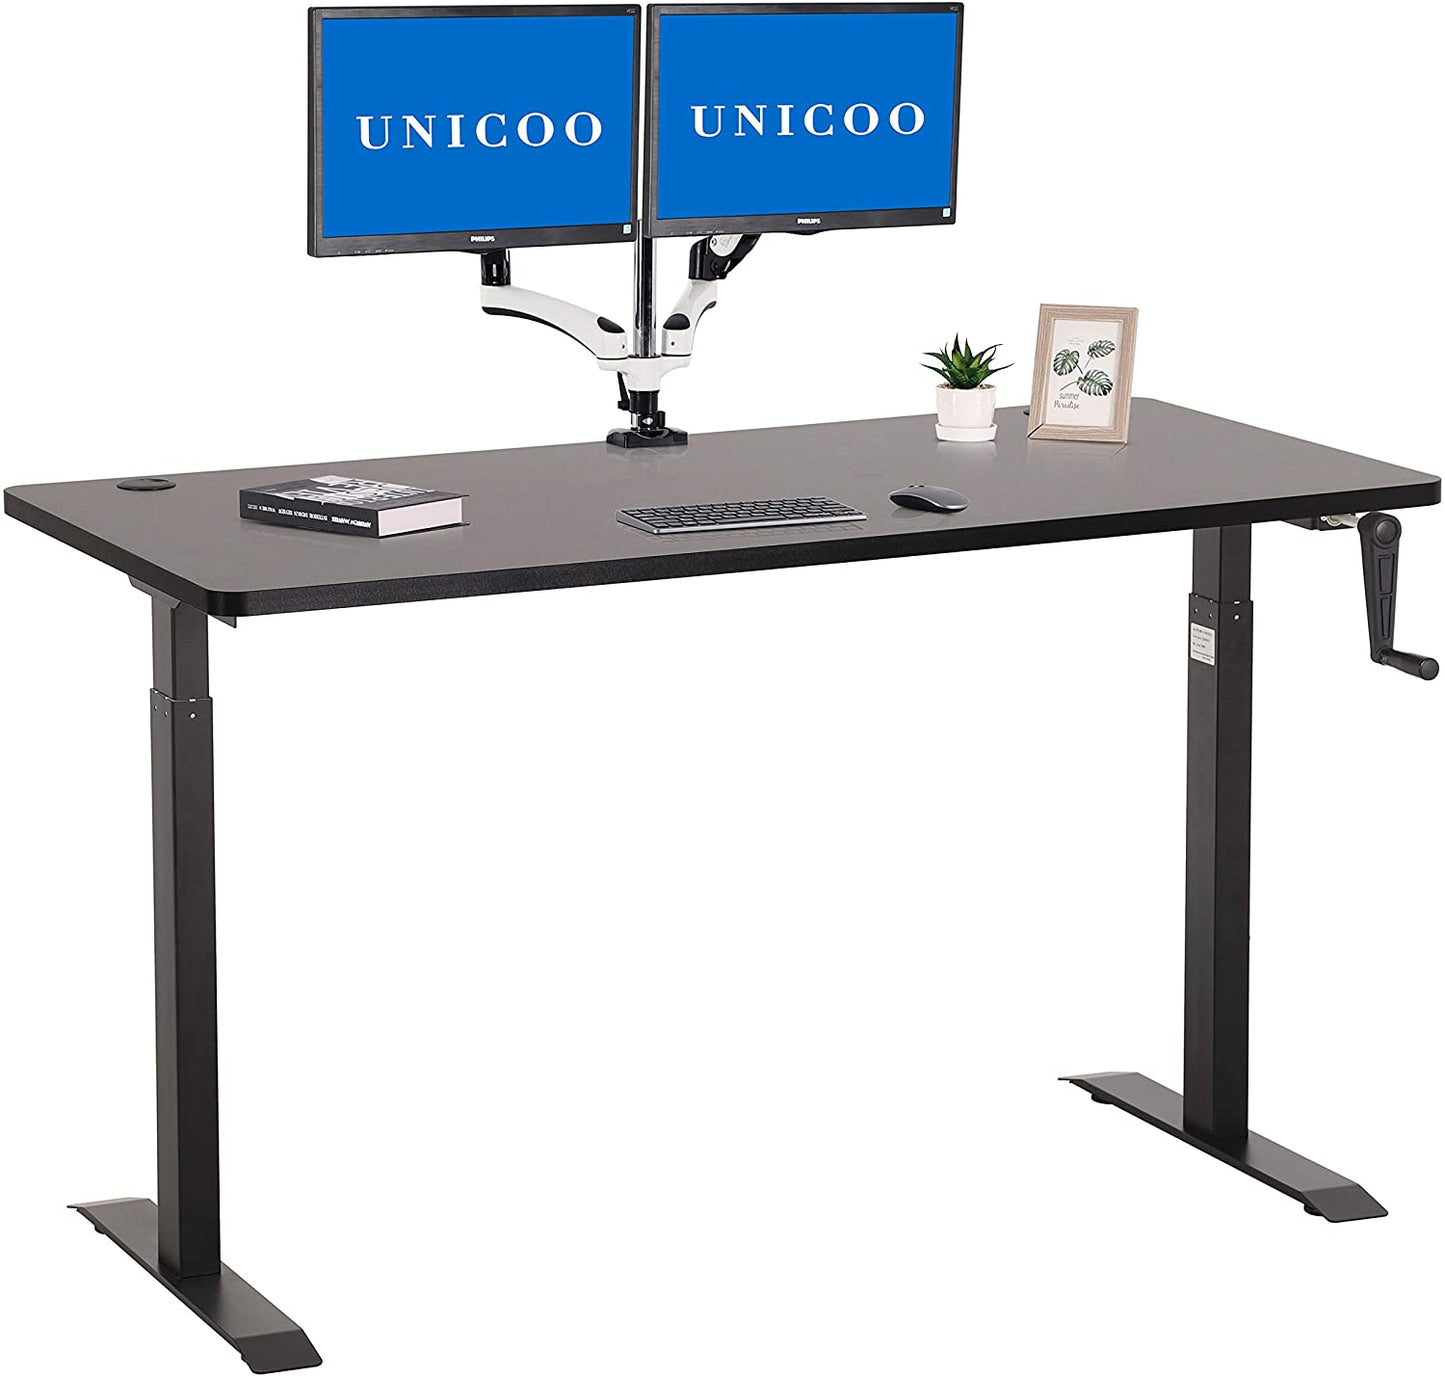 UNICOO – Premium Quality 55.12 x 27.6 Inch Crank Height Adjustable Standing Desk, Sit to Stand up Desk, Home Office Computer Table (55IN-Crank)